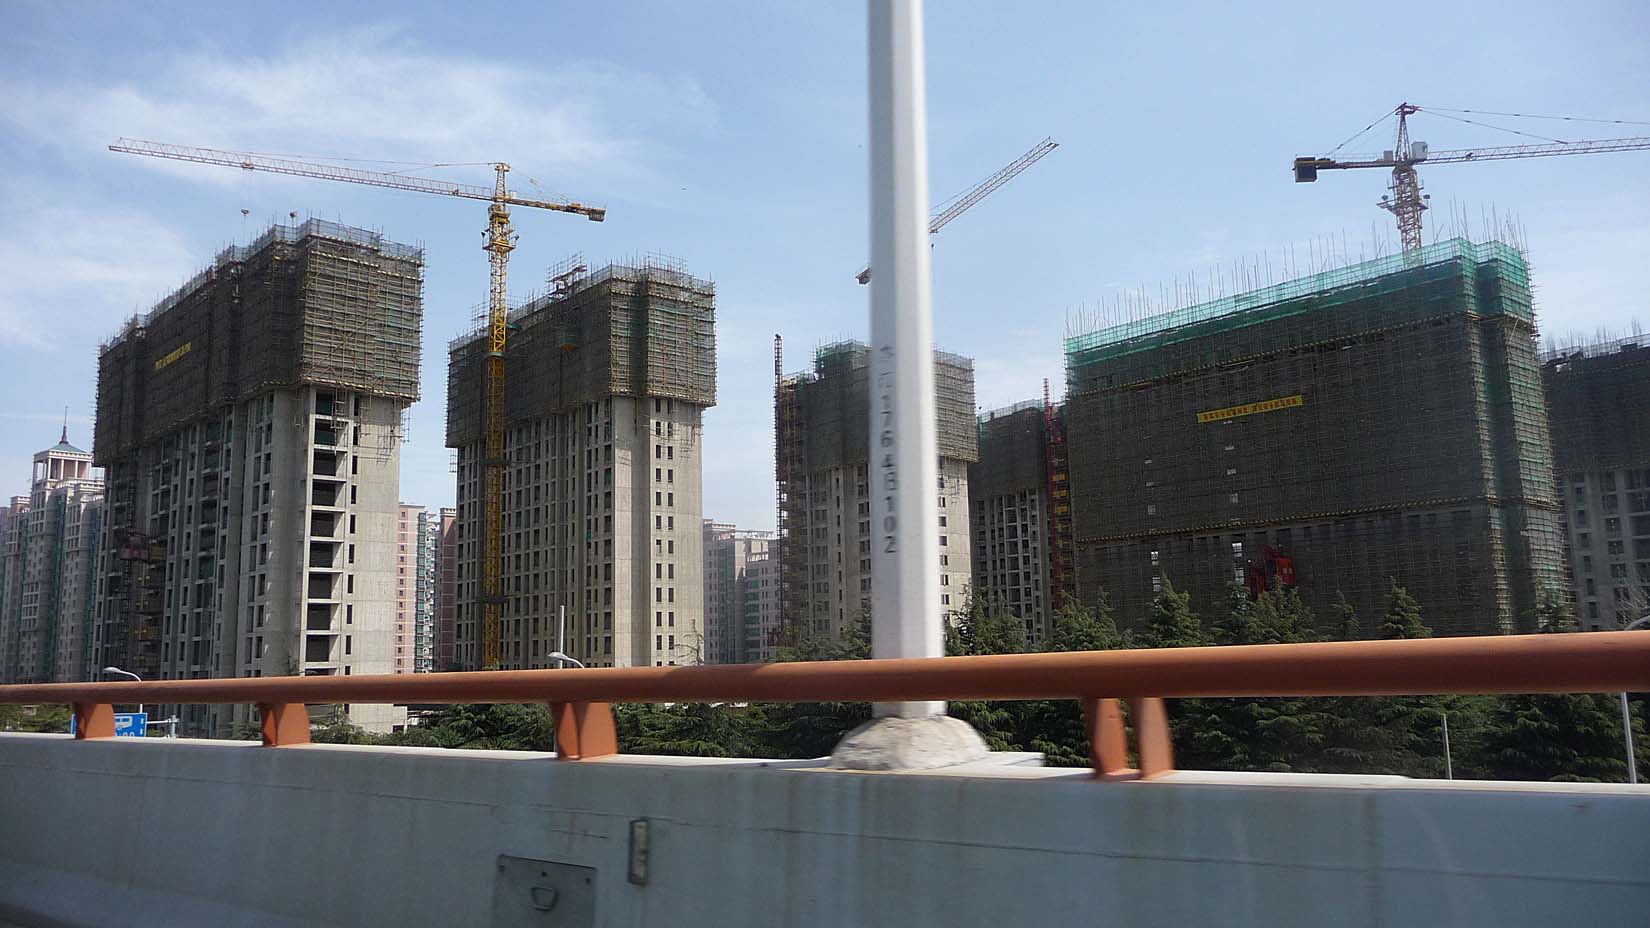 Some of the many cranes and new buildings being built in Shanghai.  The economy and construction industry is booming there!